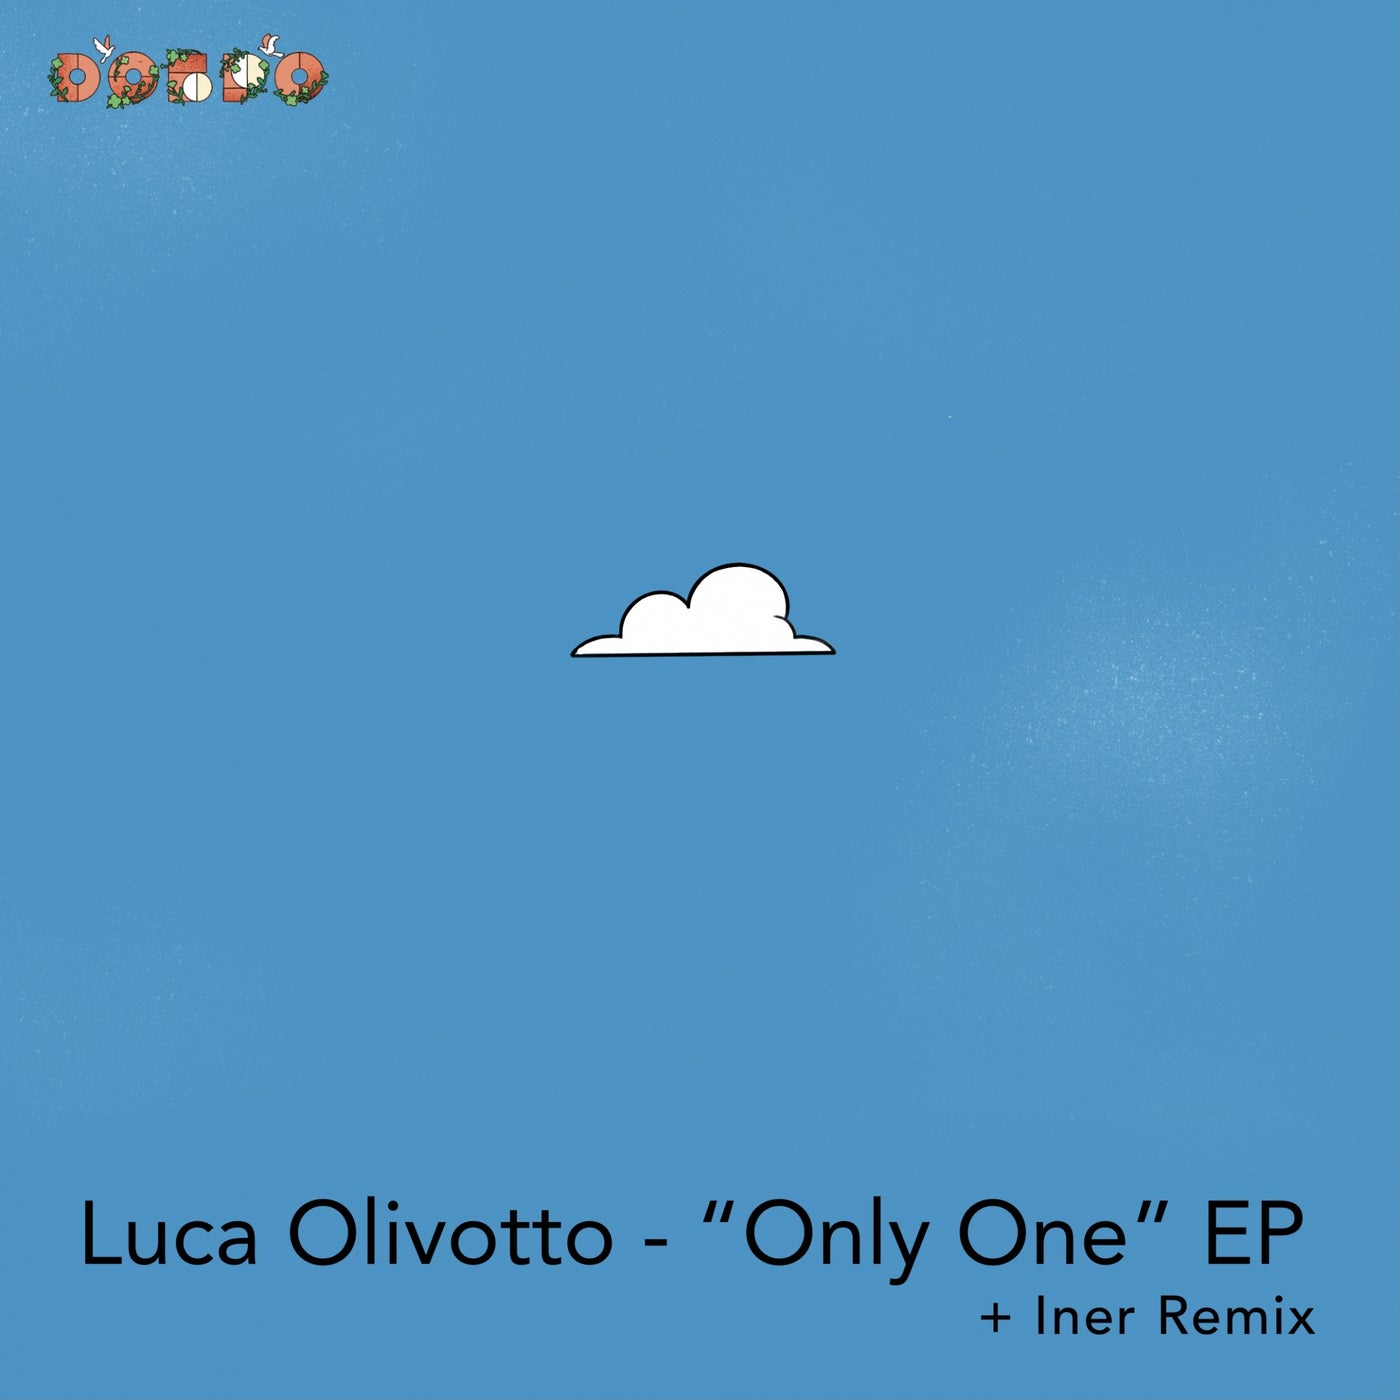 Only One EP